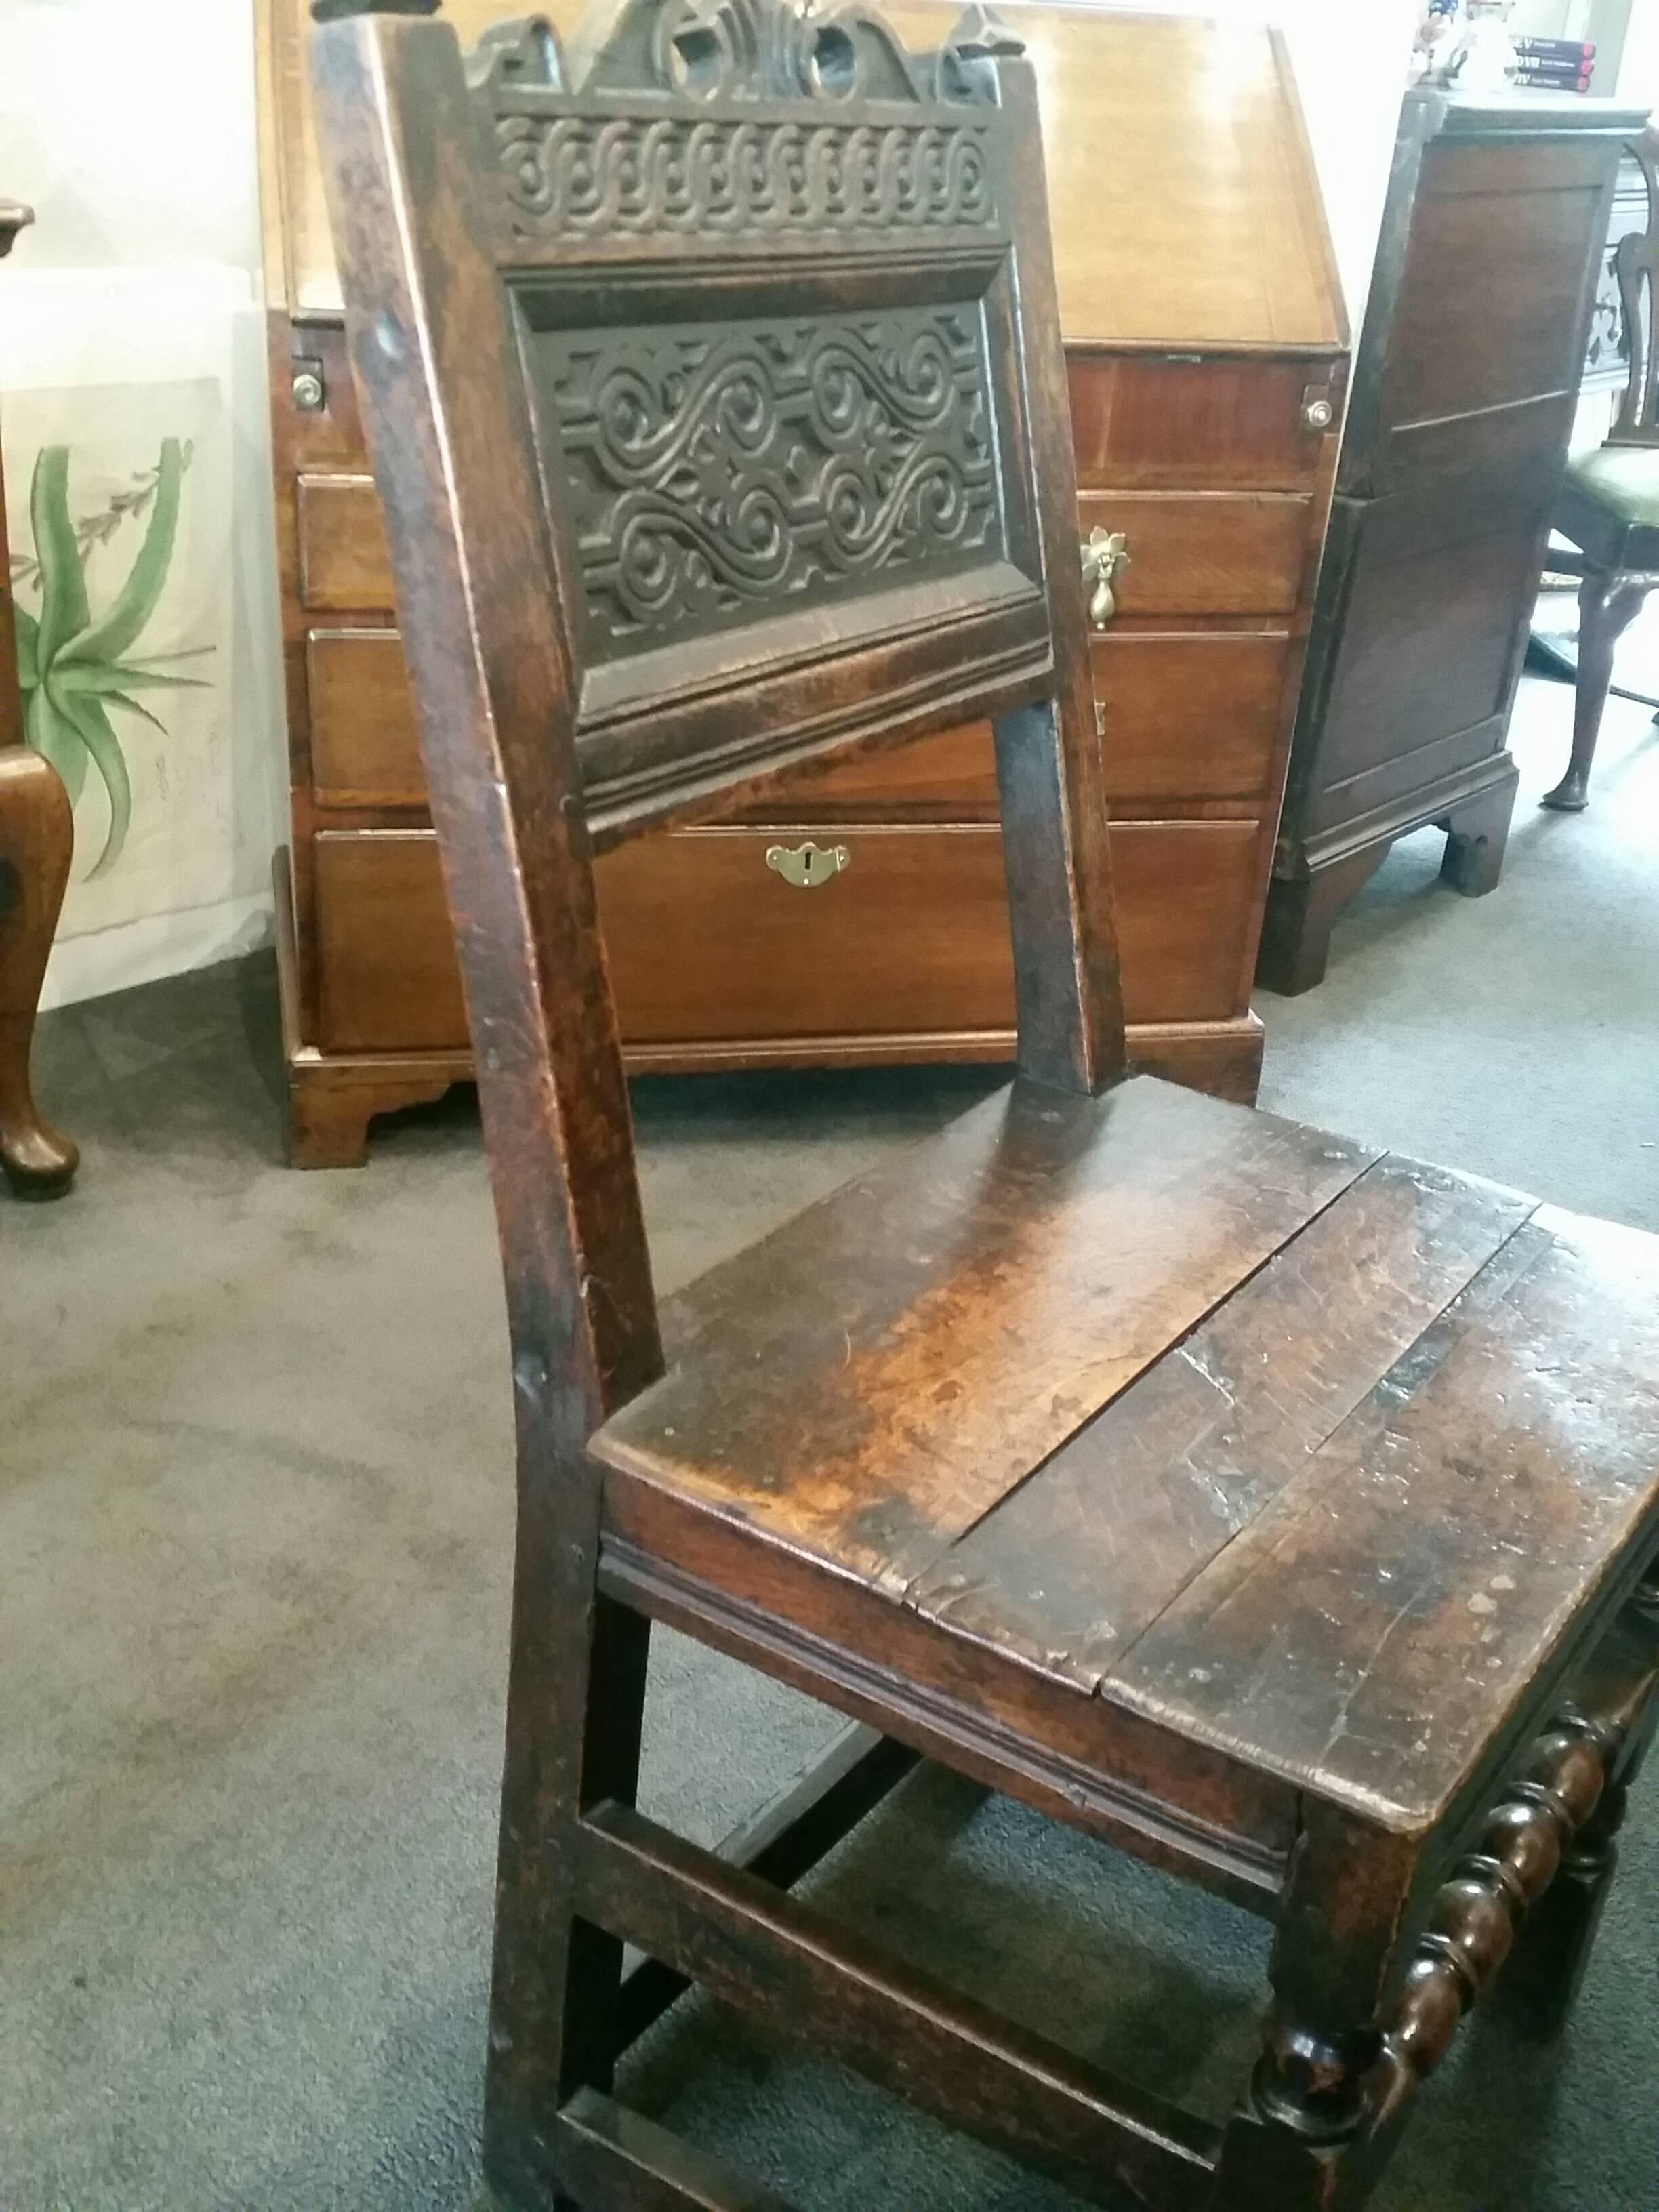 17th century oak wainscot chair

Original carving

Incredibly stunning

A gallery favorite.

circa 1660.
  